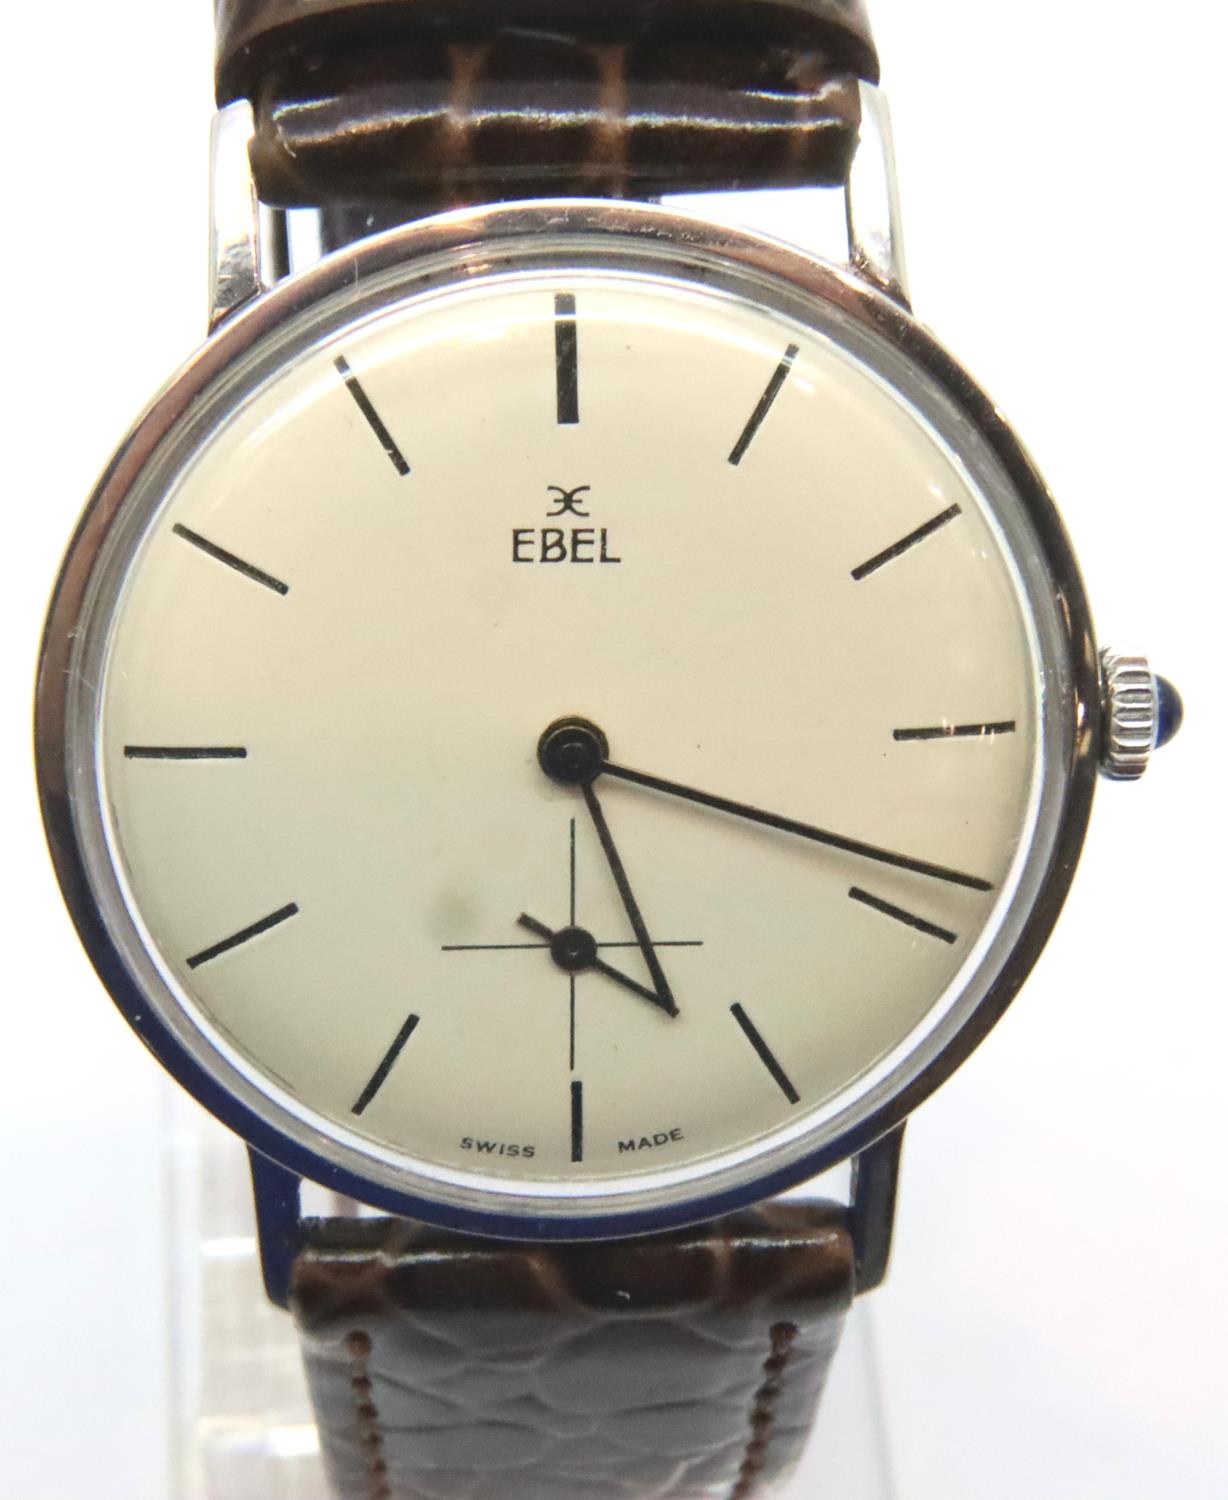 Ebel; vintage ultra slim mechanical wristwatch with cream dial, second sub dial and brown leather - Image 2 of 3